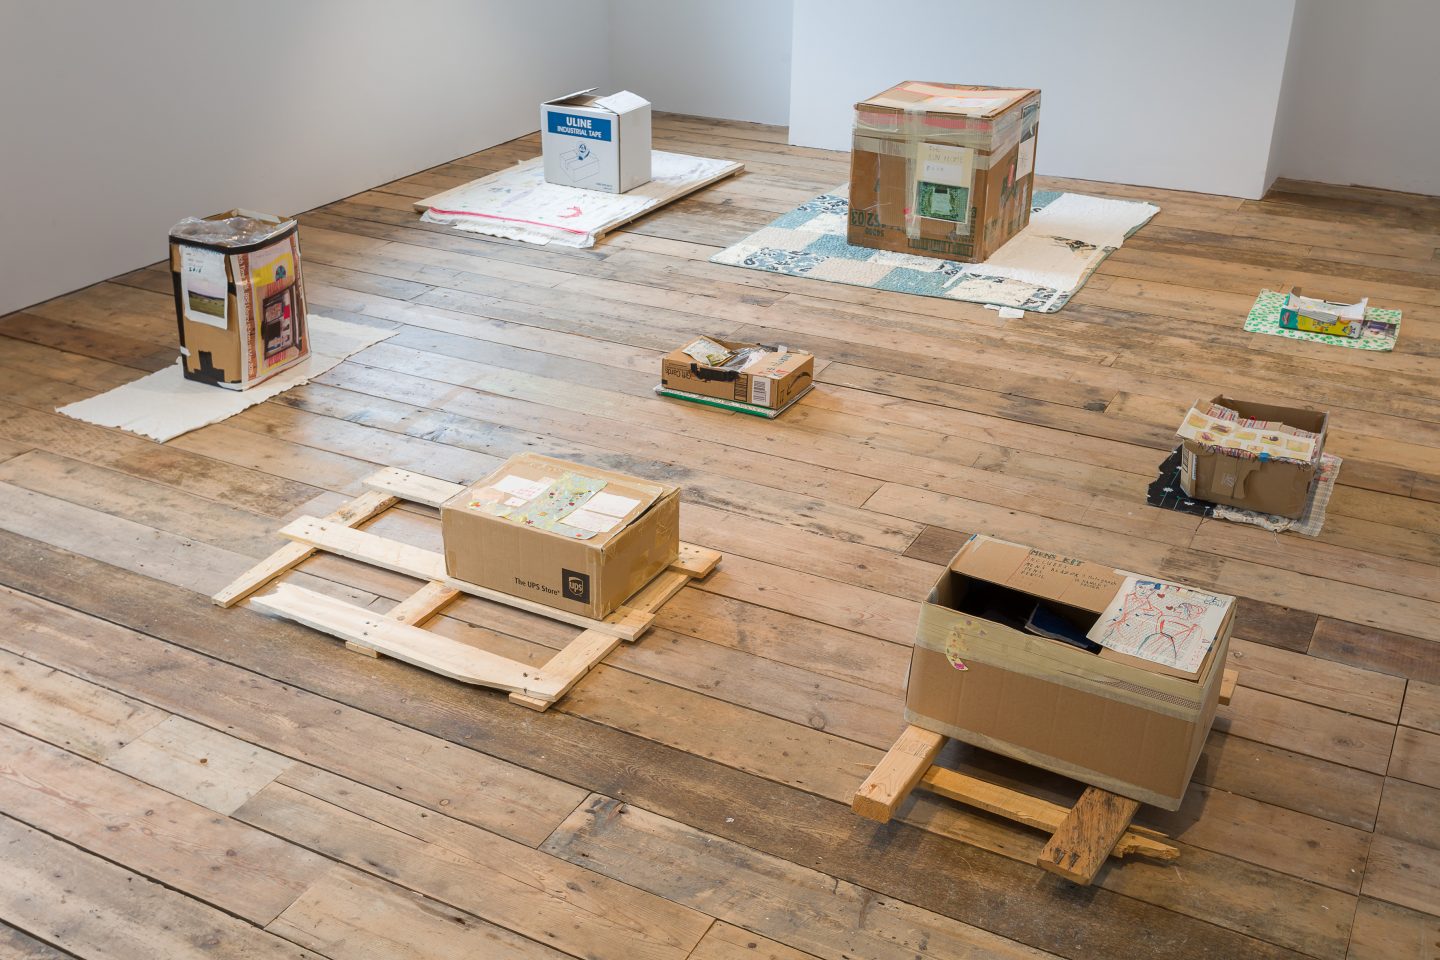 Susan Cianciolo, Kits, 1996–2016. Installation view at the South London Gallery Fire Station, 2019
Courtesy the artist, Modern Art, London and Bridget Donahue, New York. Photo: Mark Blower
